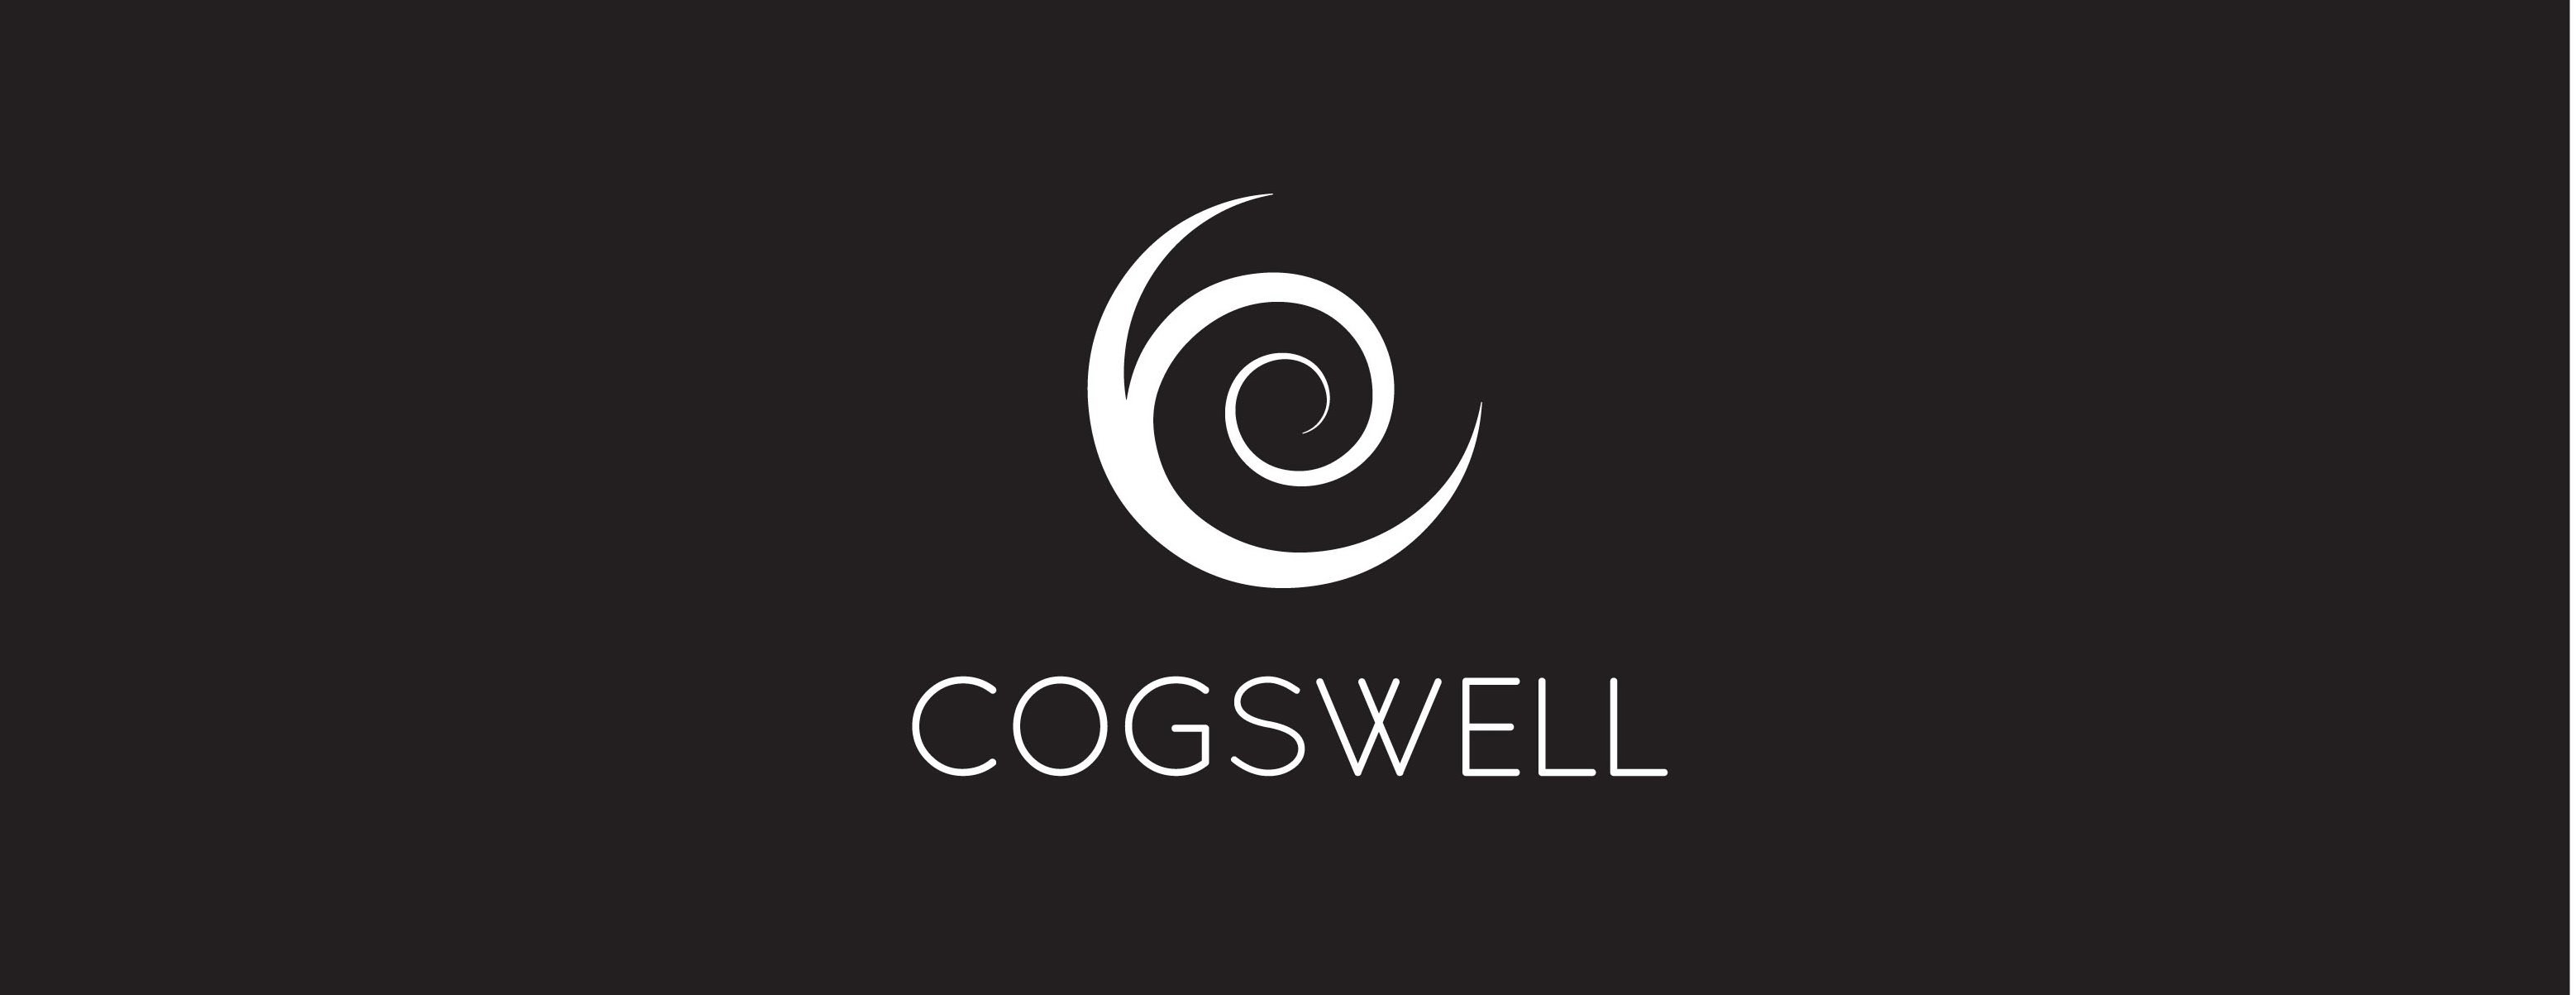 COGSWELL